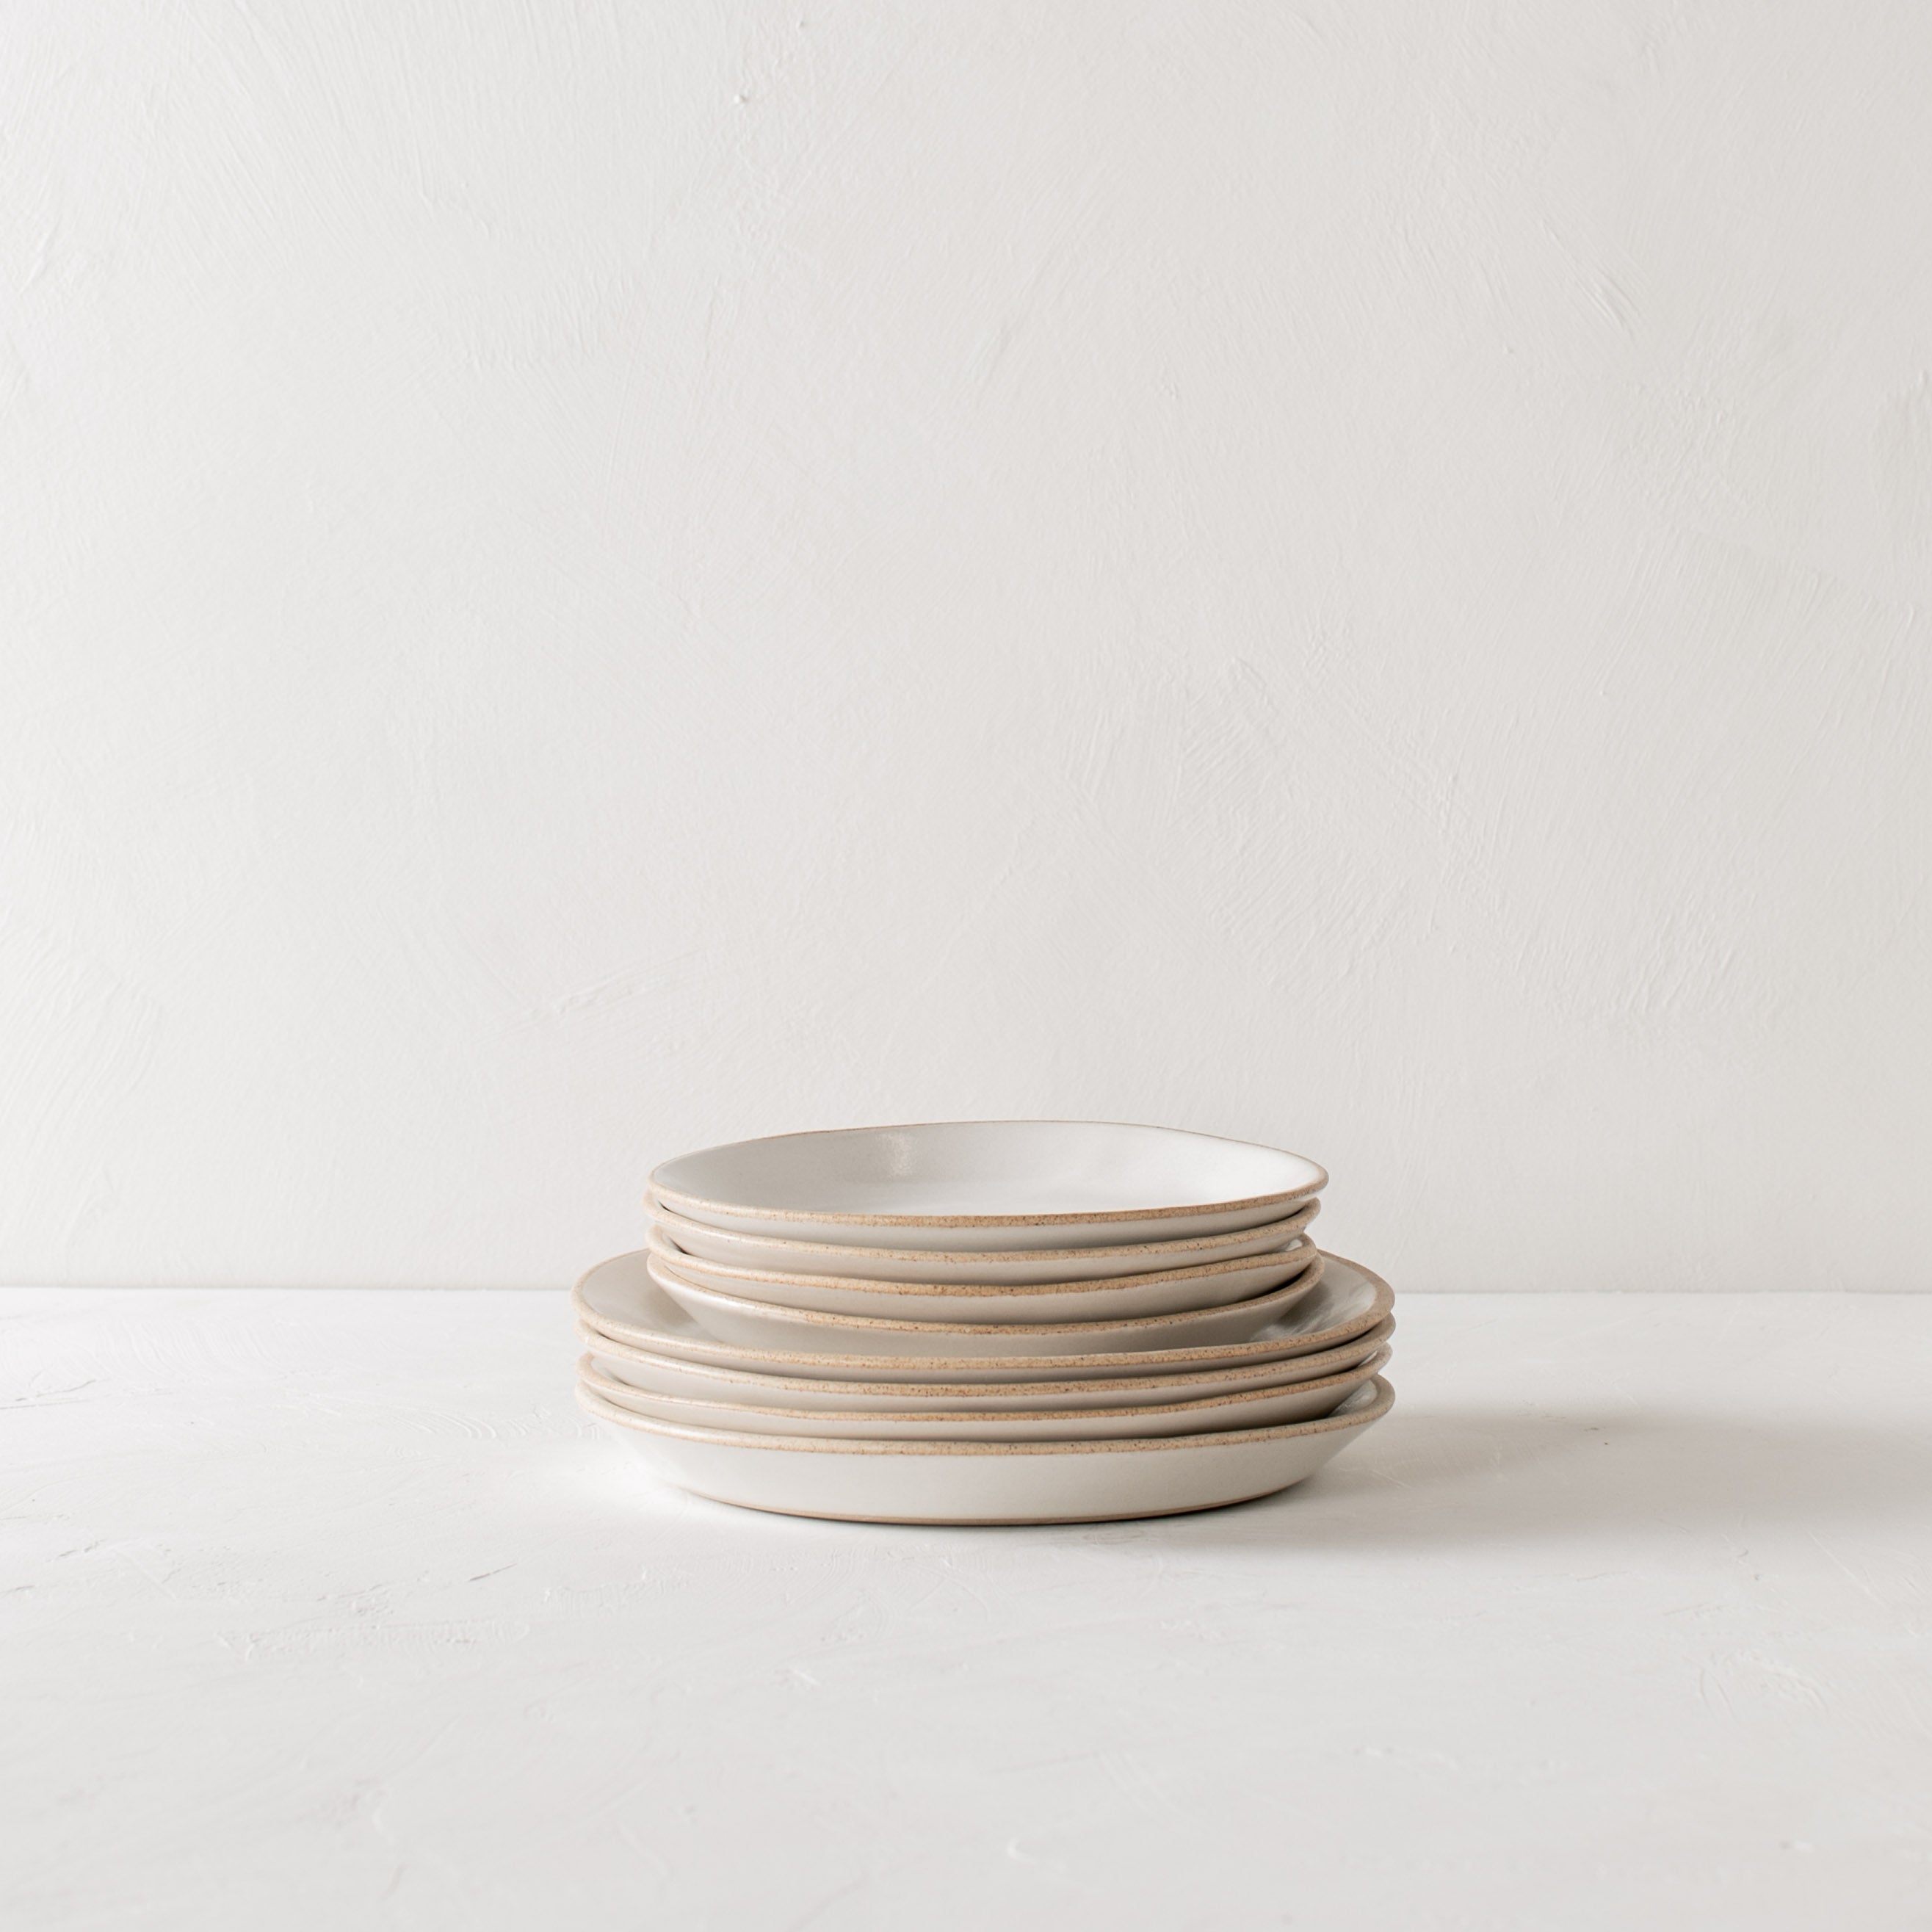 Minimal white ceramic plates stacked, four salad plates stacked on four dinner plates. Handmade ceramic plates, designed and sold by Convivial Production, Kansas City ceramics.